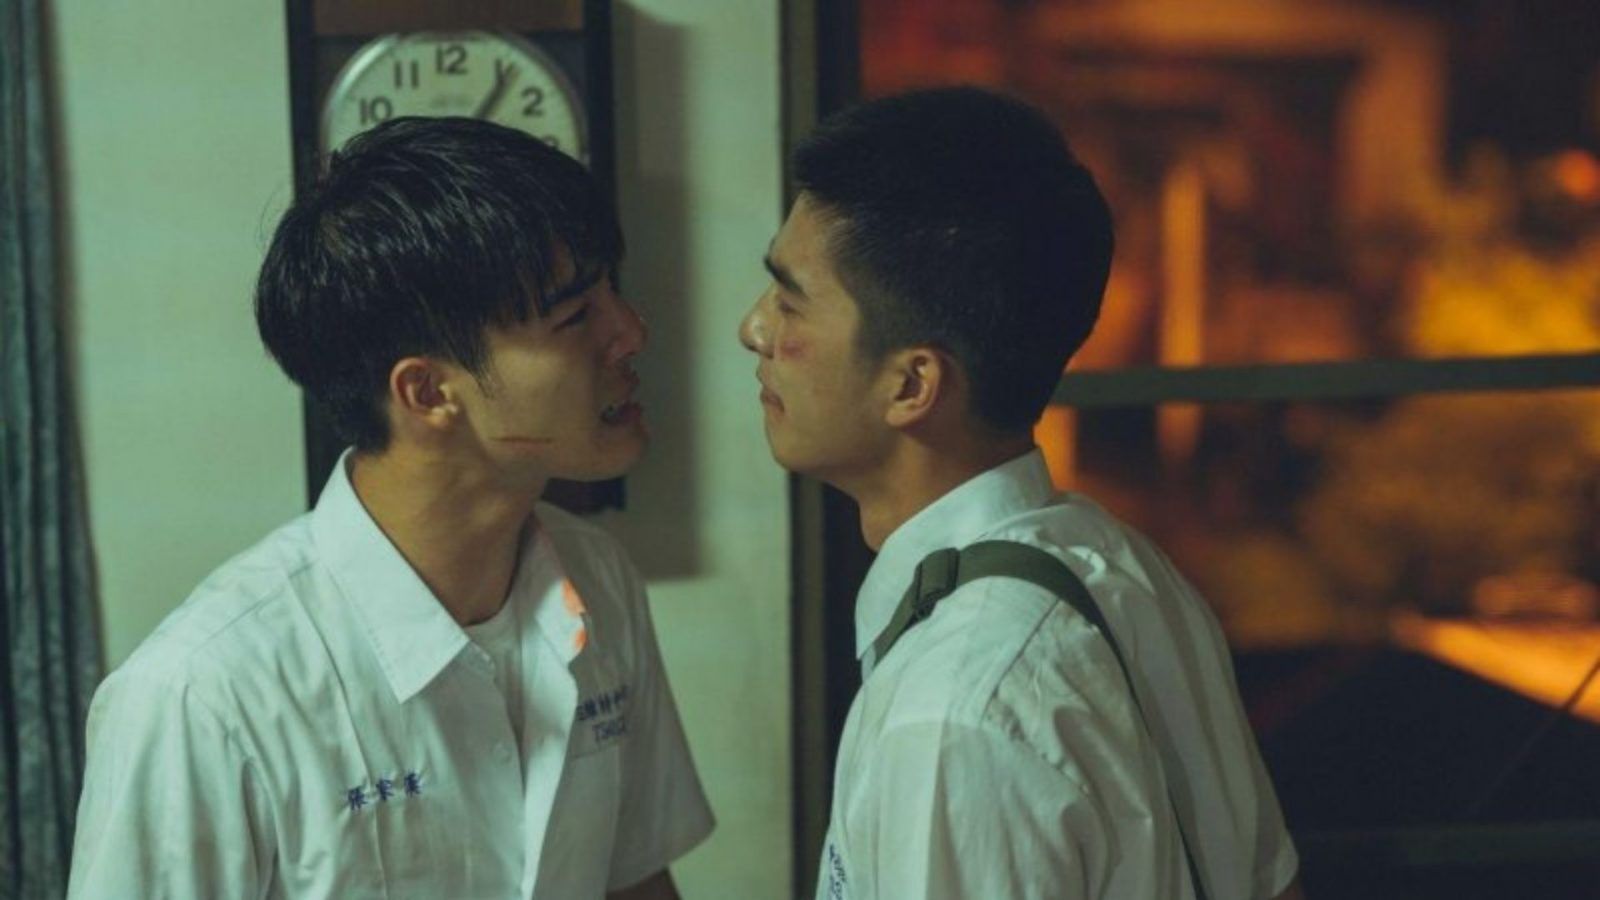 Asian Sleeping Nude - 11 Asian LGBTQ+ movies to watch this Pride Month